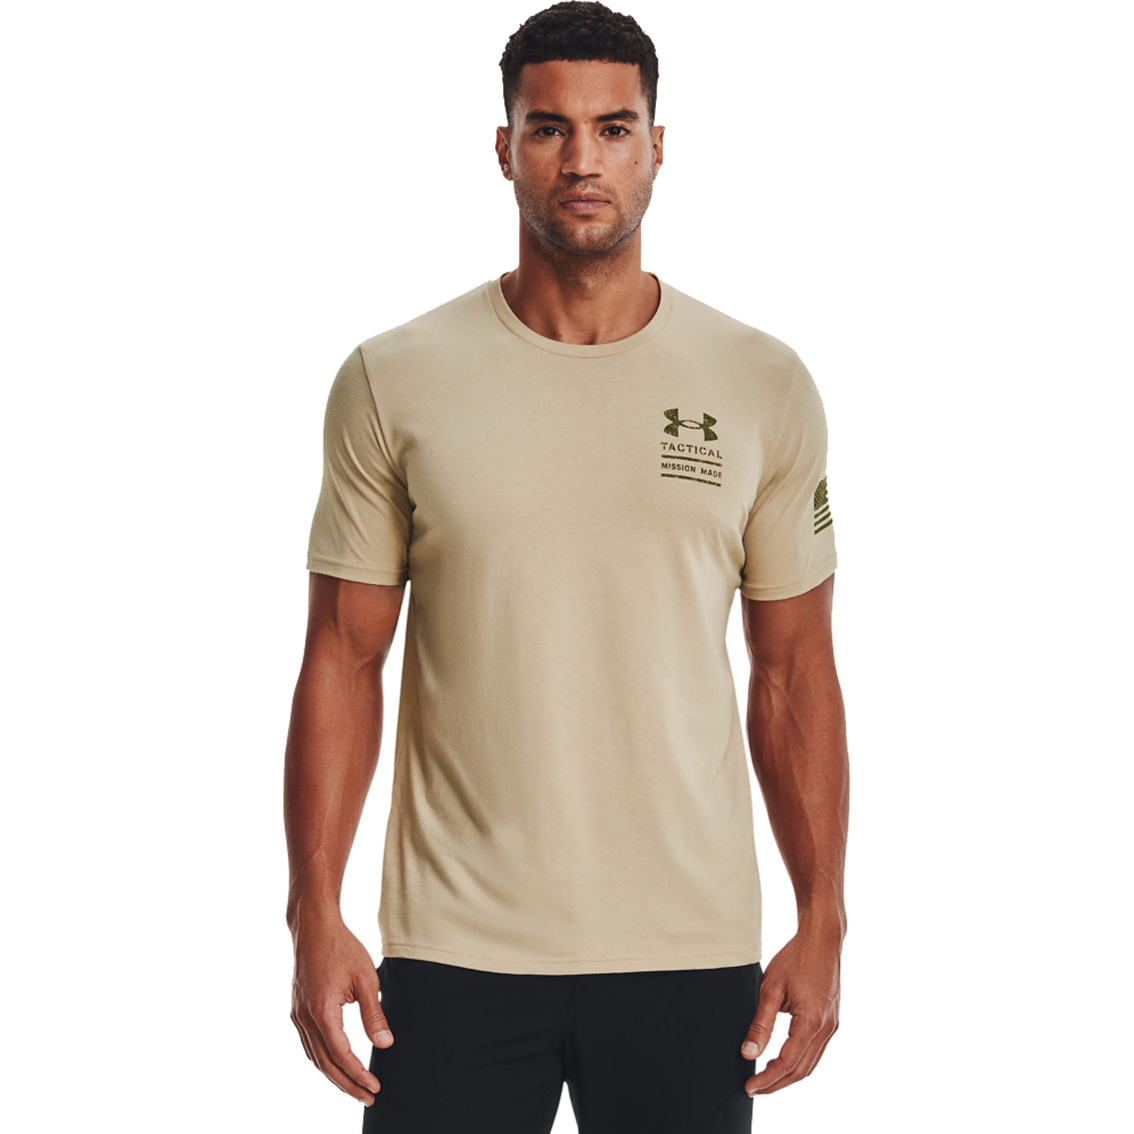 Under Armour Freedom Mission Made Tee | Shirts | Clothing & Accessories ...